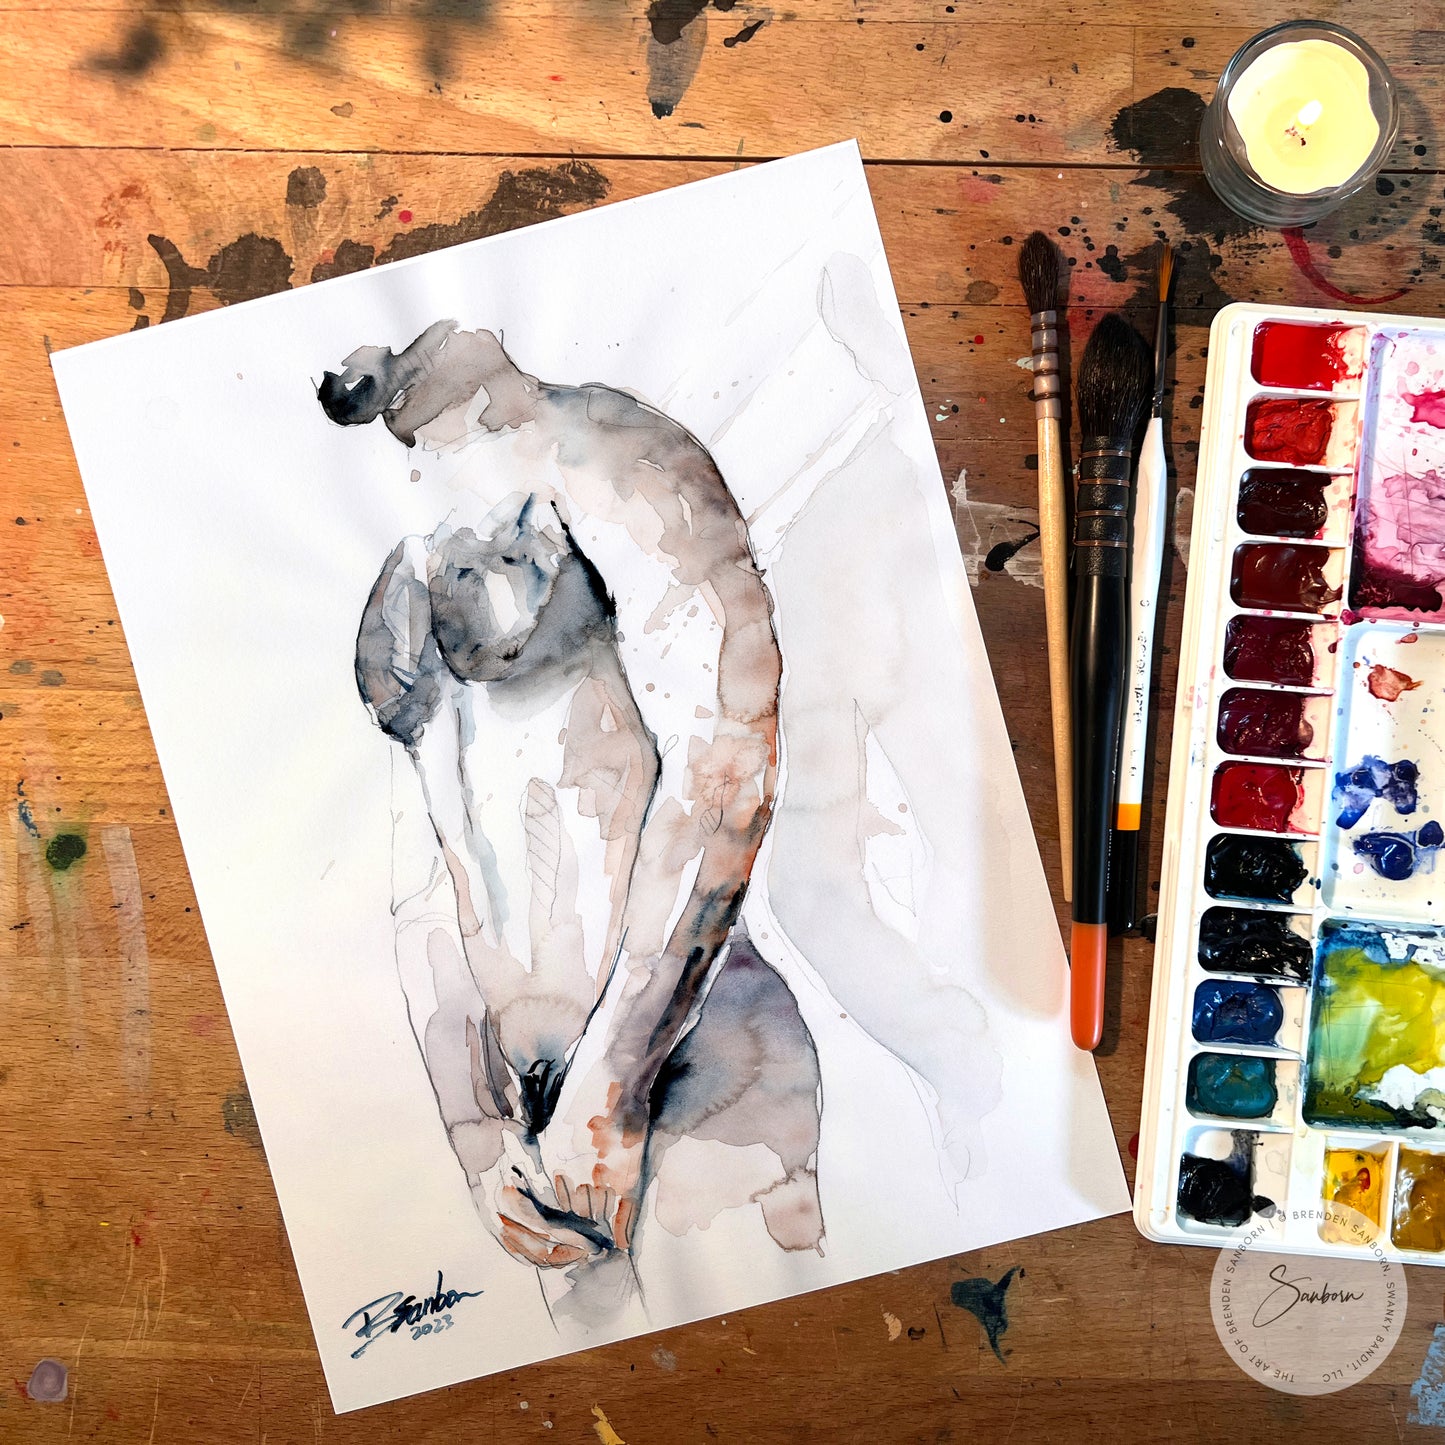 Lean Male Figure, Delicate Pose with Subtle Strength - 9x12" Original Watercolor Painting